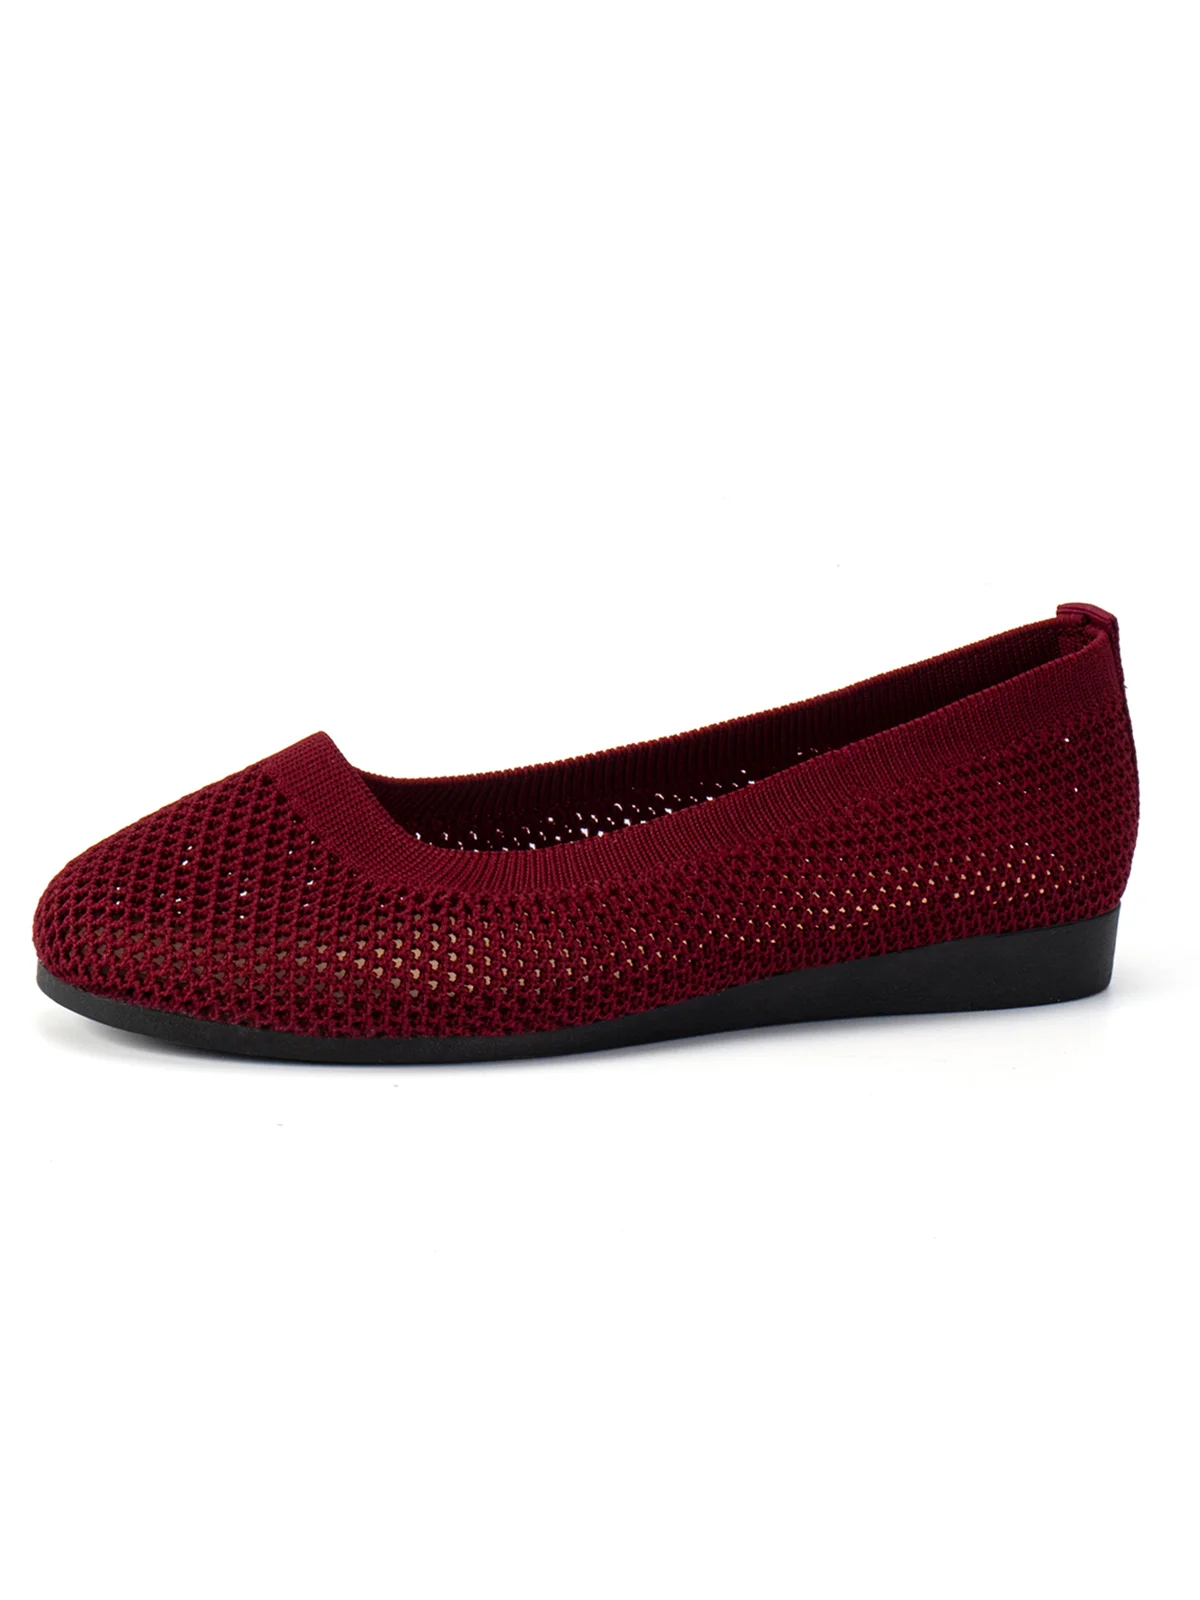 Breathable Hollow out Mesh Fabric Casual Shallow Shoes | noracora